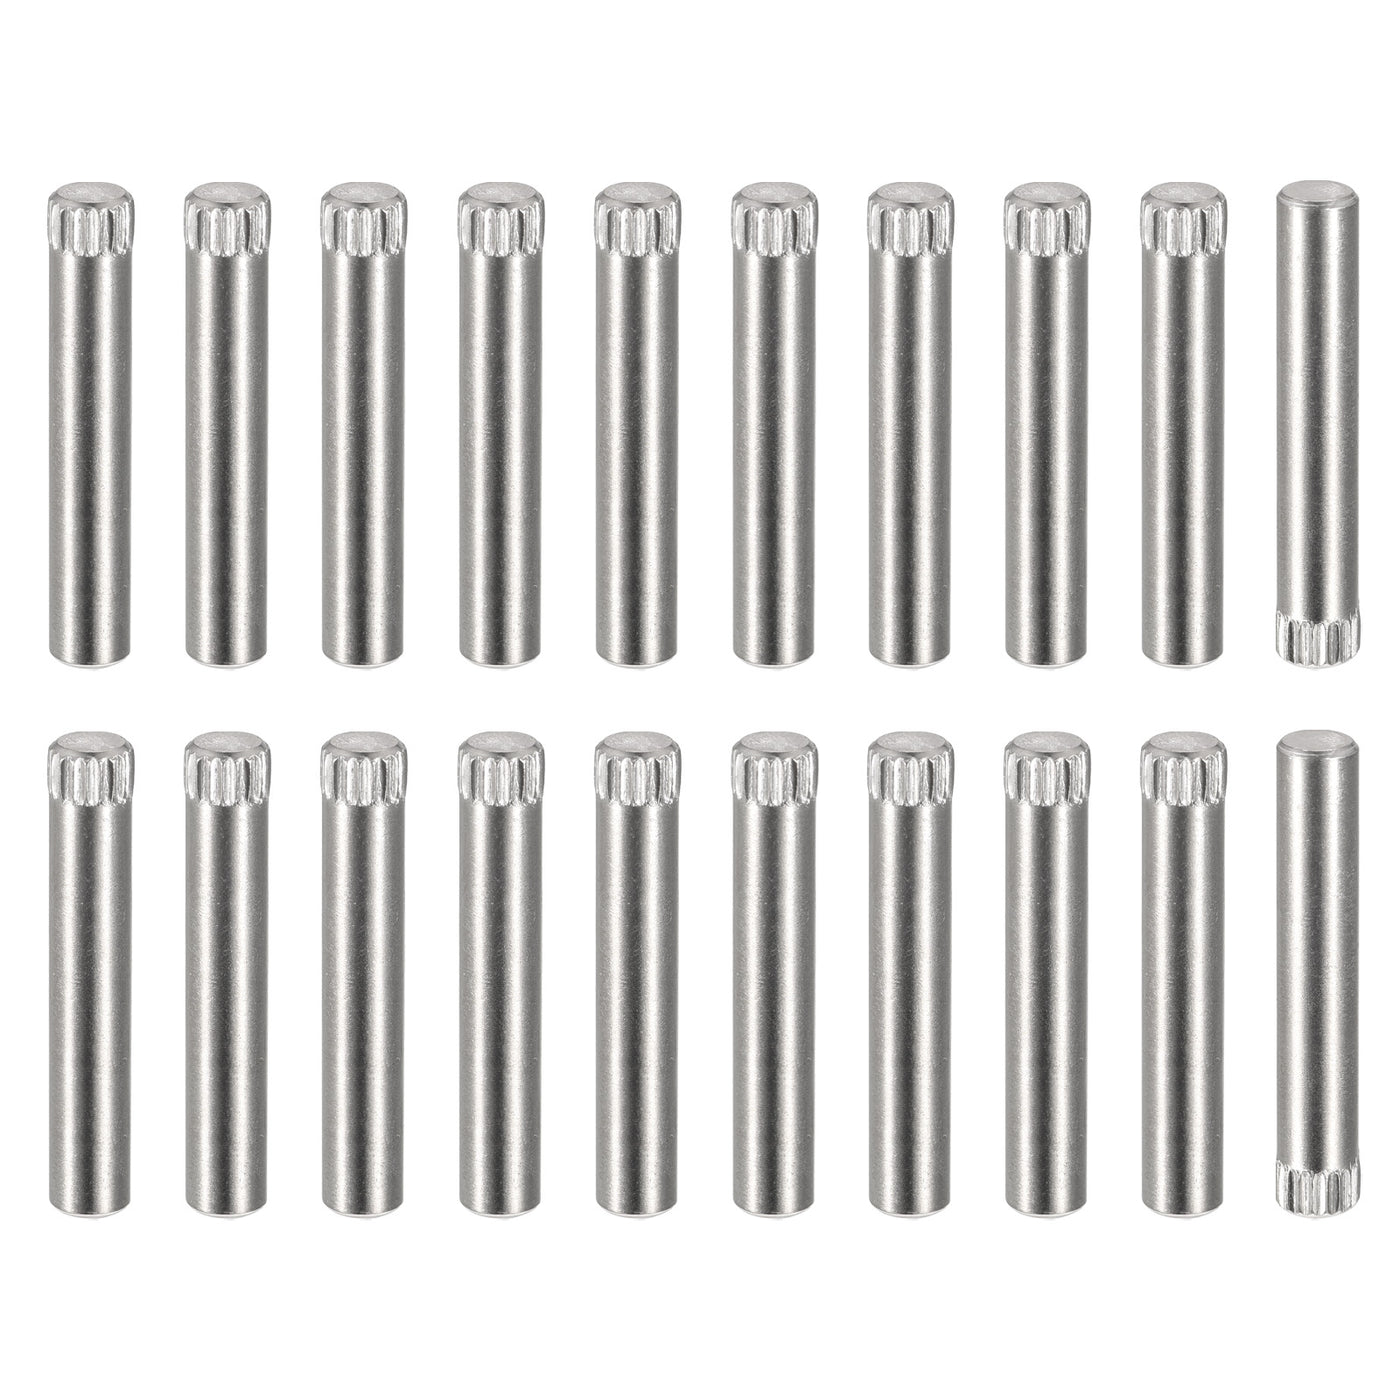 uxcell Uxcell 5x30mm 304 Stainless Steel Dowel Pins, 20Pcs Knurled Head Flat End Dowel Pin